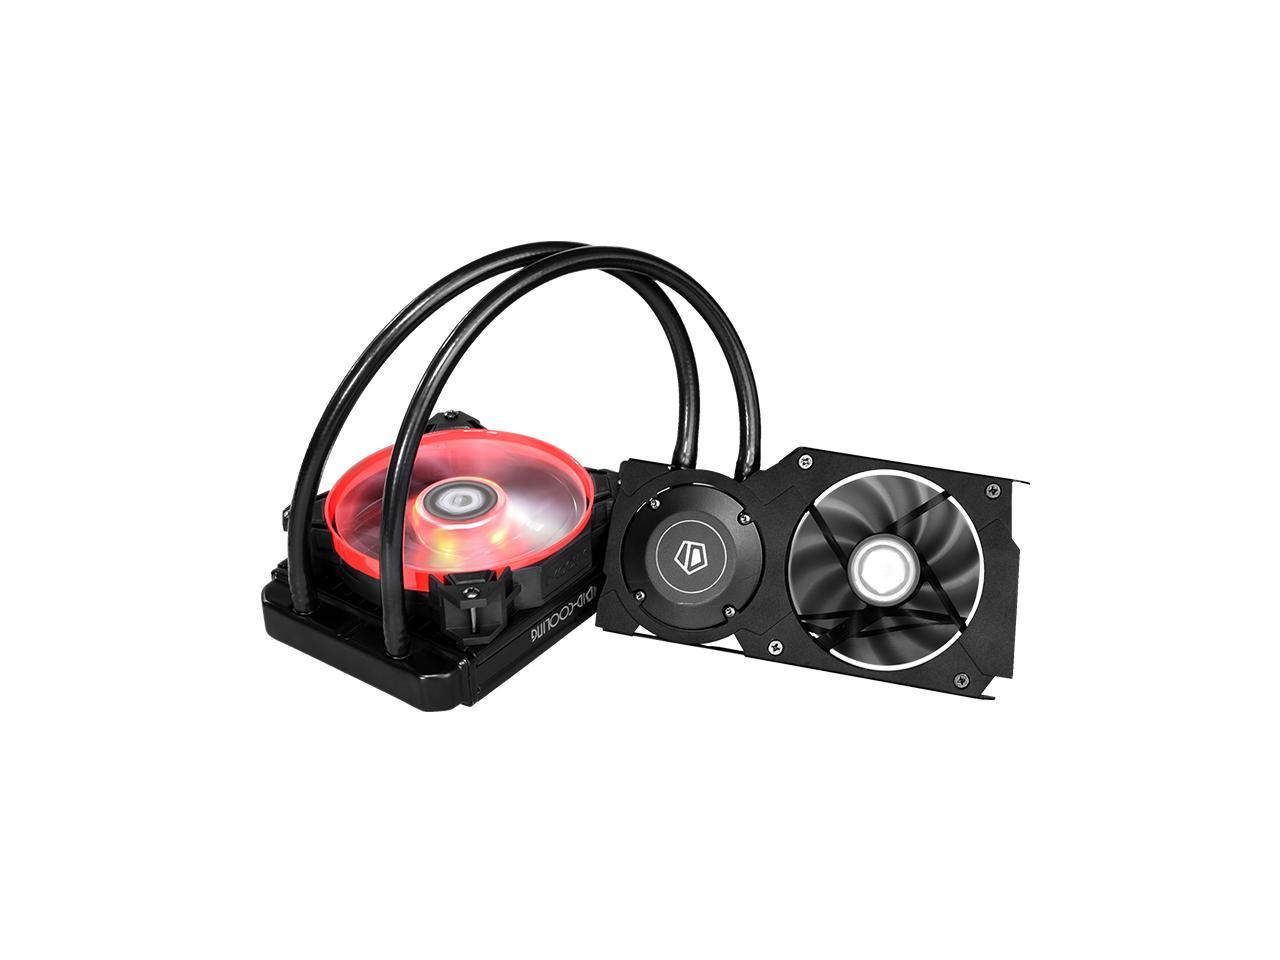 Id Cooling Frostflow 1 Vga Graphic Card Cooler Aio 1mm Radiator Water Cooler Gpu Vga Cooler Compatible With Rtx70 80 80ti 5700 5700xt Series 1070 1080 Series Newegg Com